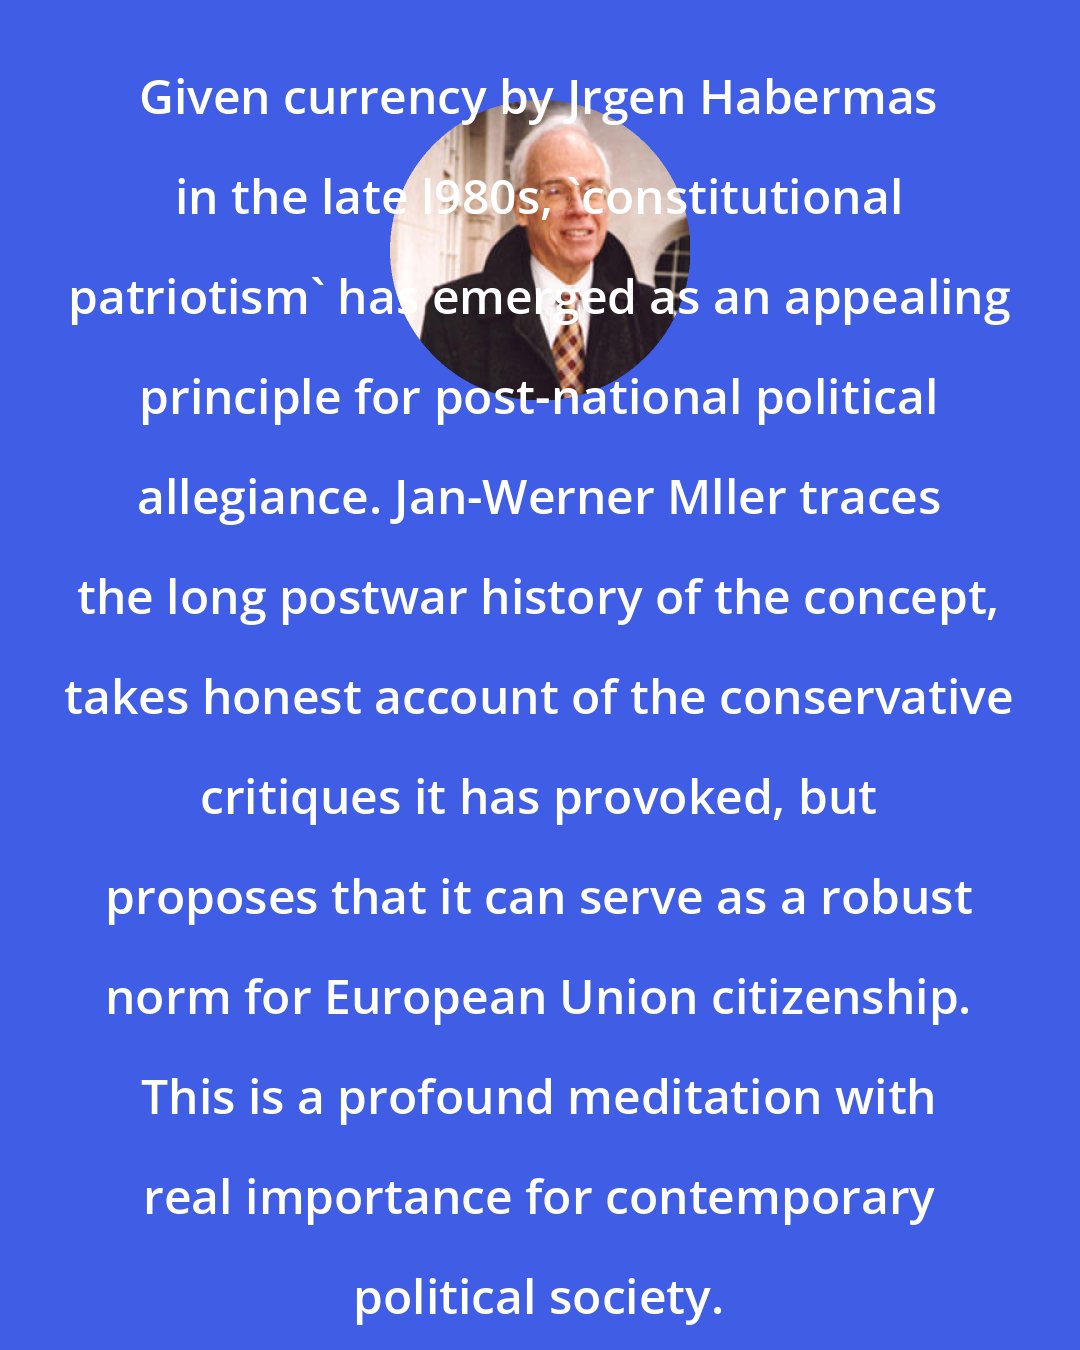 Charles S. Maier: Given currency by Jrgen Habermas in the late l980s, 'constitutional patriotism' has emerged as an appealing principle for post-national political allegiance. Jan-Werner Mller traces the long postwar history of the concept, takes honest account of the conservative critiques it has provoked, but proposes that it can serve as a robust norm for European Union citizenship. This is a profound meditation with real importance for contemporary political society.